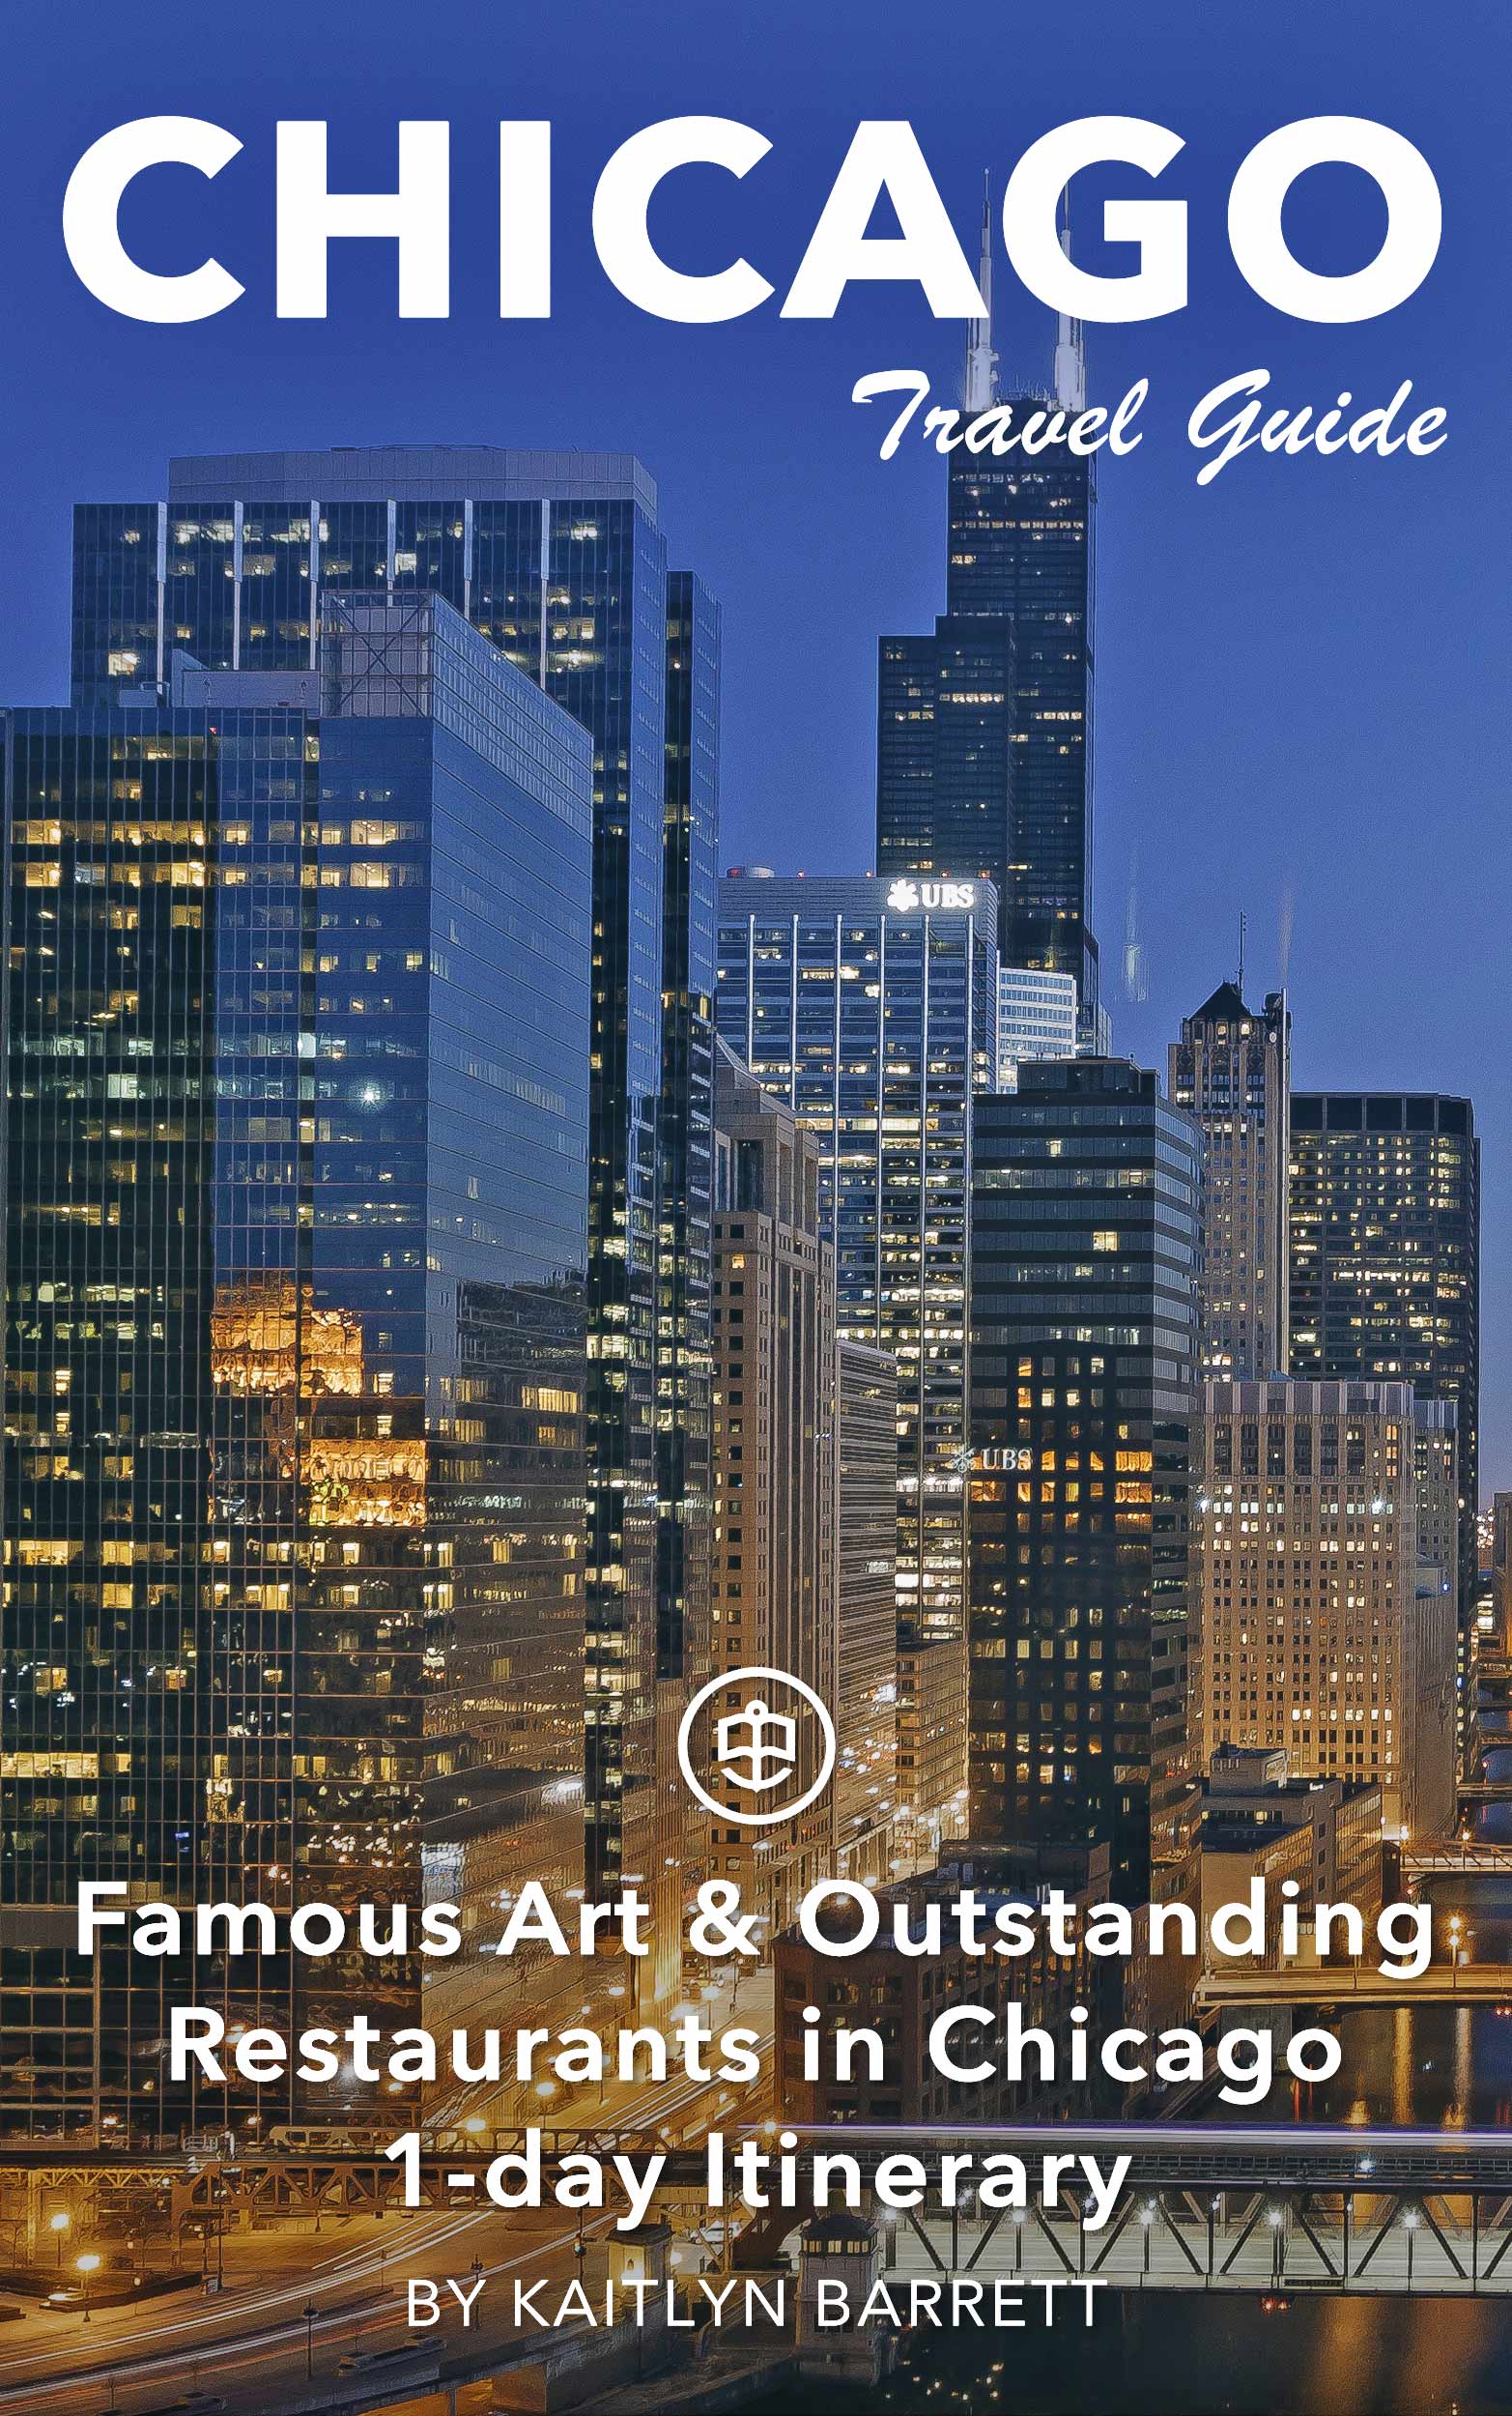 Famous Art & Outstanding Restaurants in Chicago 1-Day Itinerary